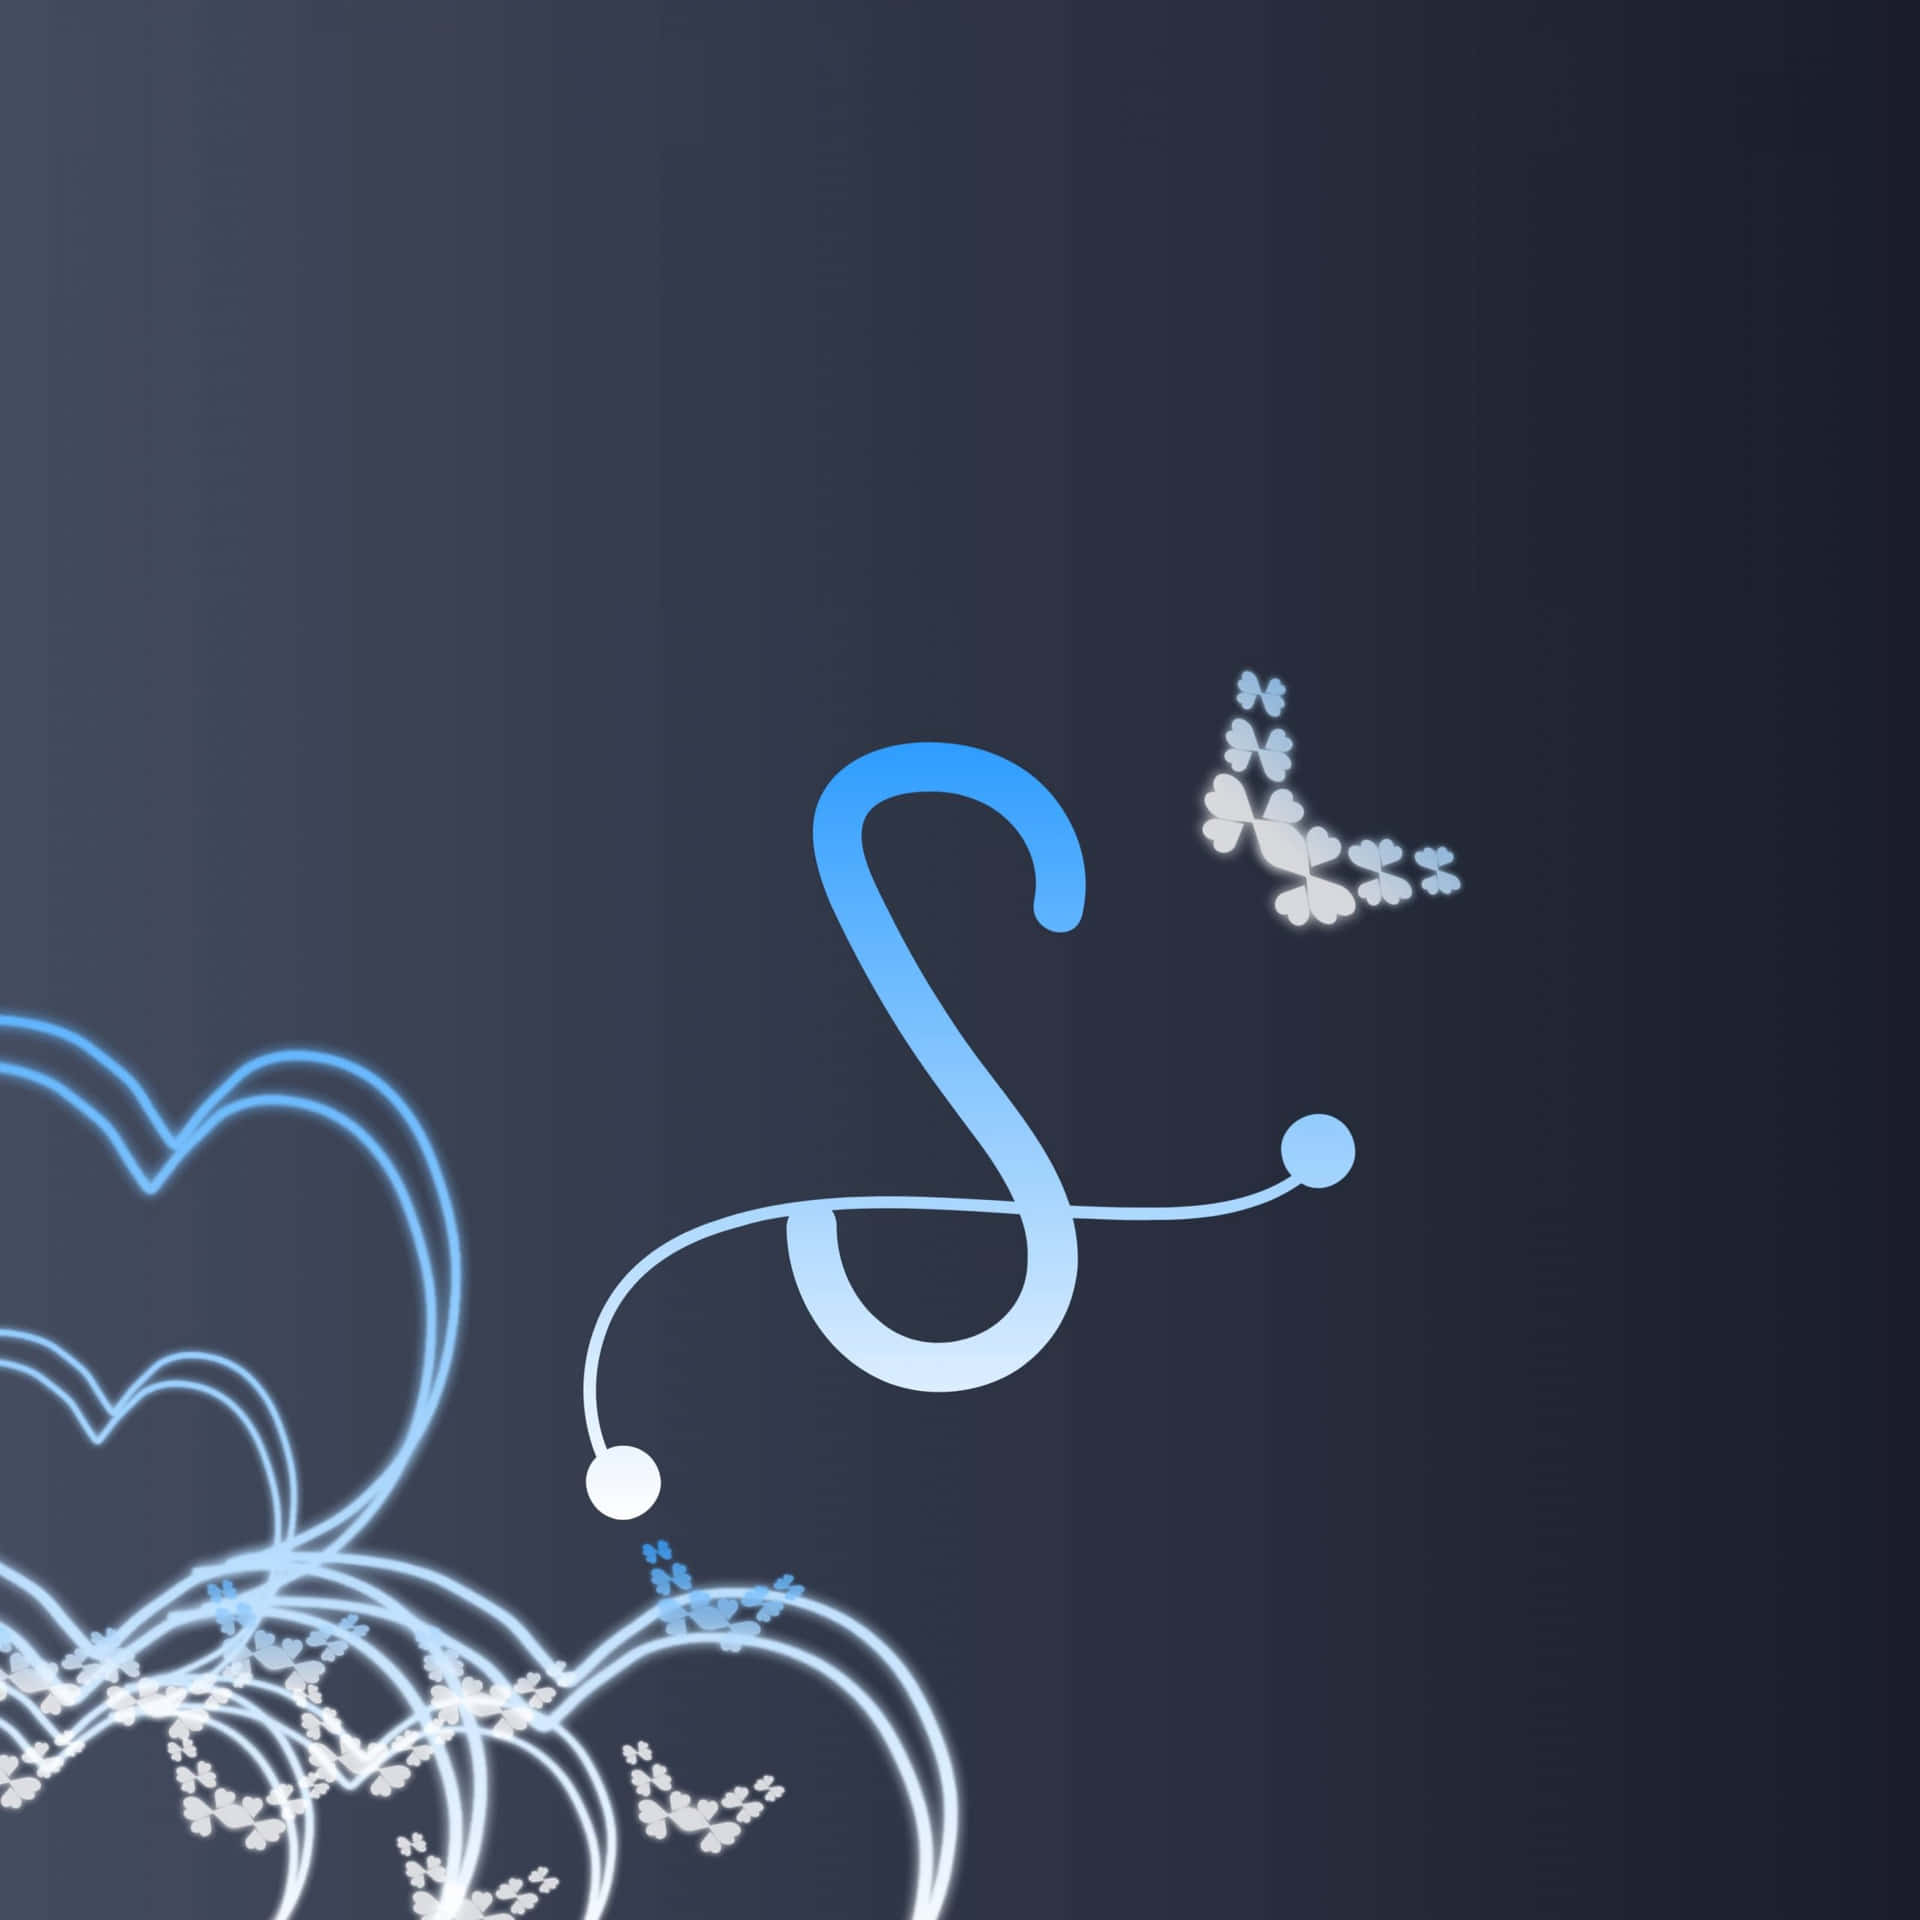 Find music's true vitality with the letter S